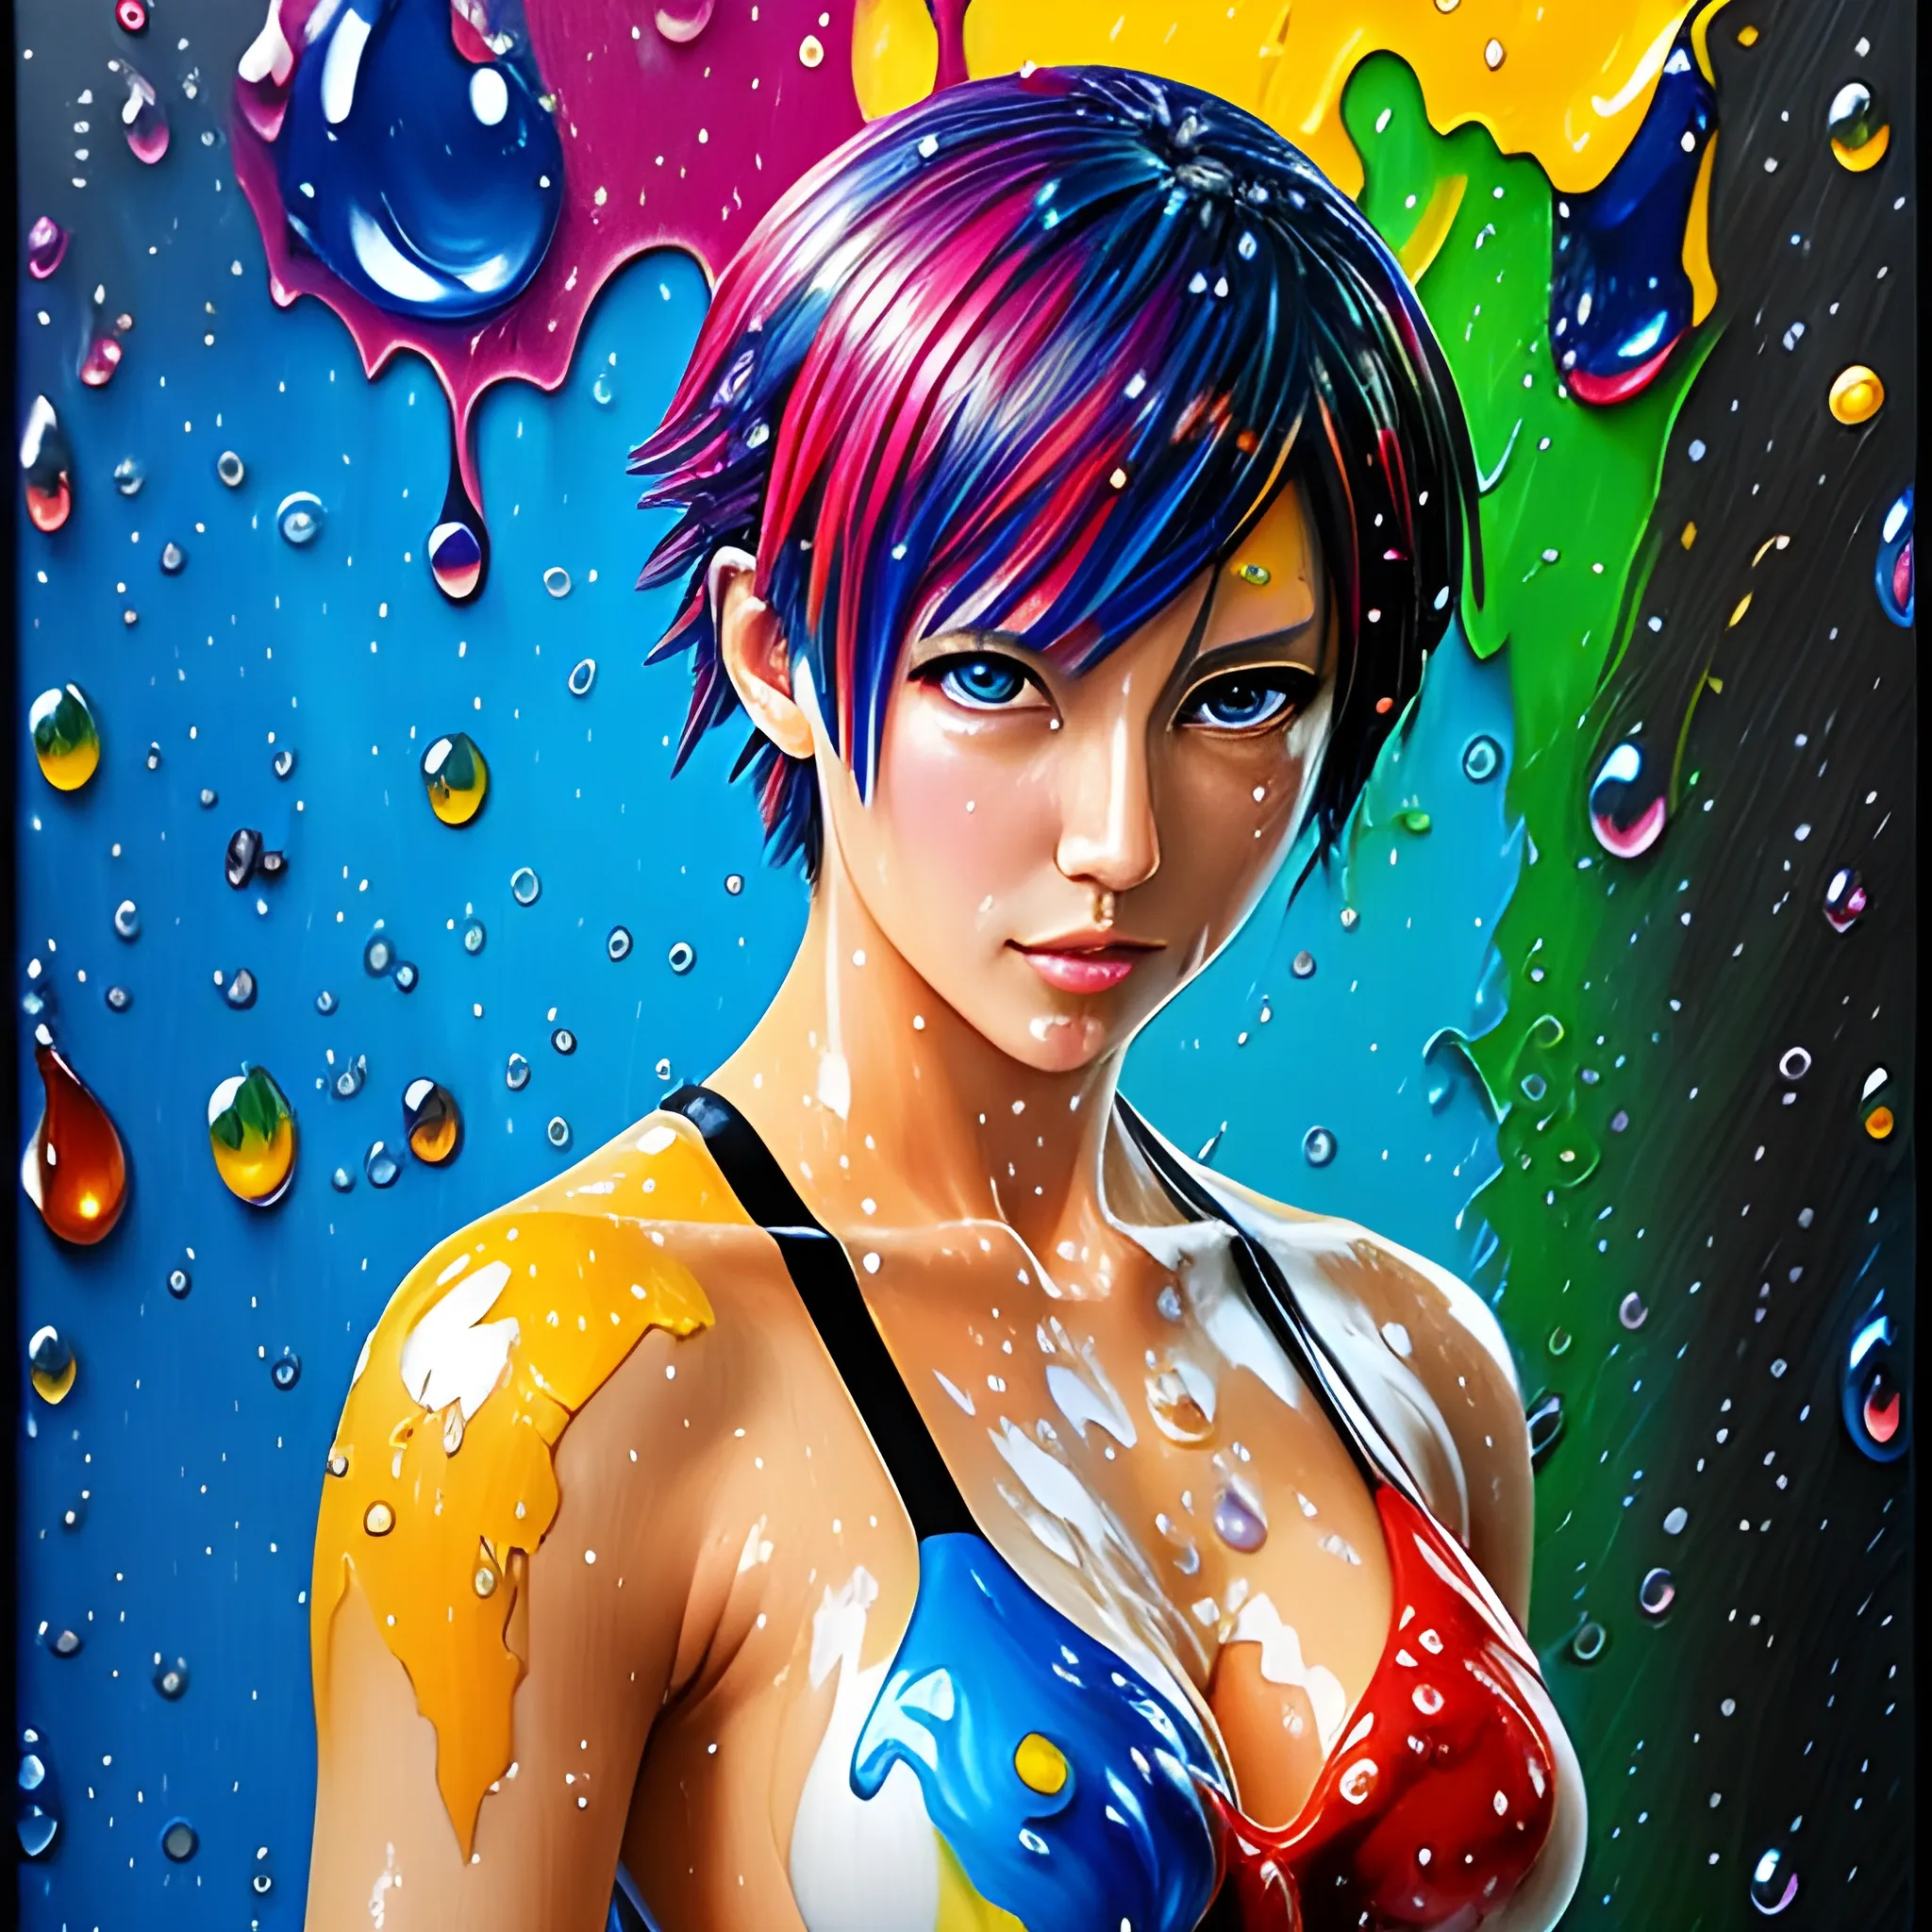  modern colorful melting glass, water droplets and dust splash anime makoto oil painting of a supermodel , toyism, oil painting without frame, keygen, looking hot, strong engineer style, 